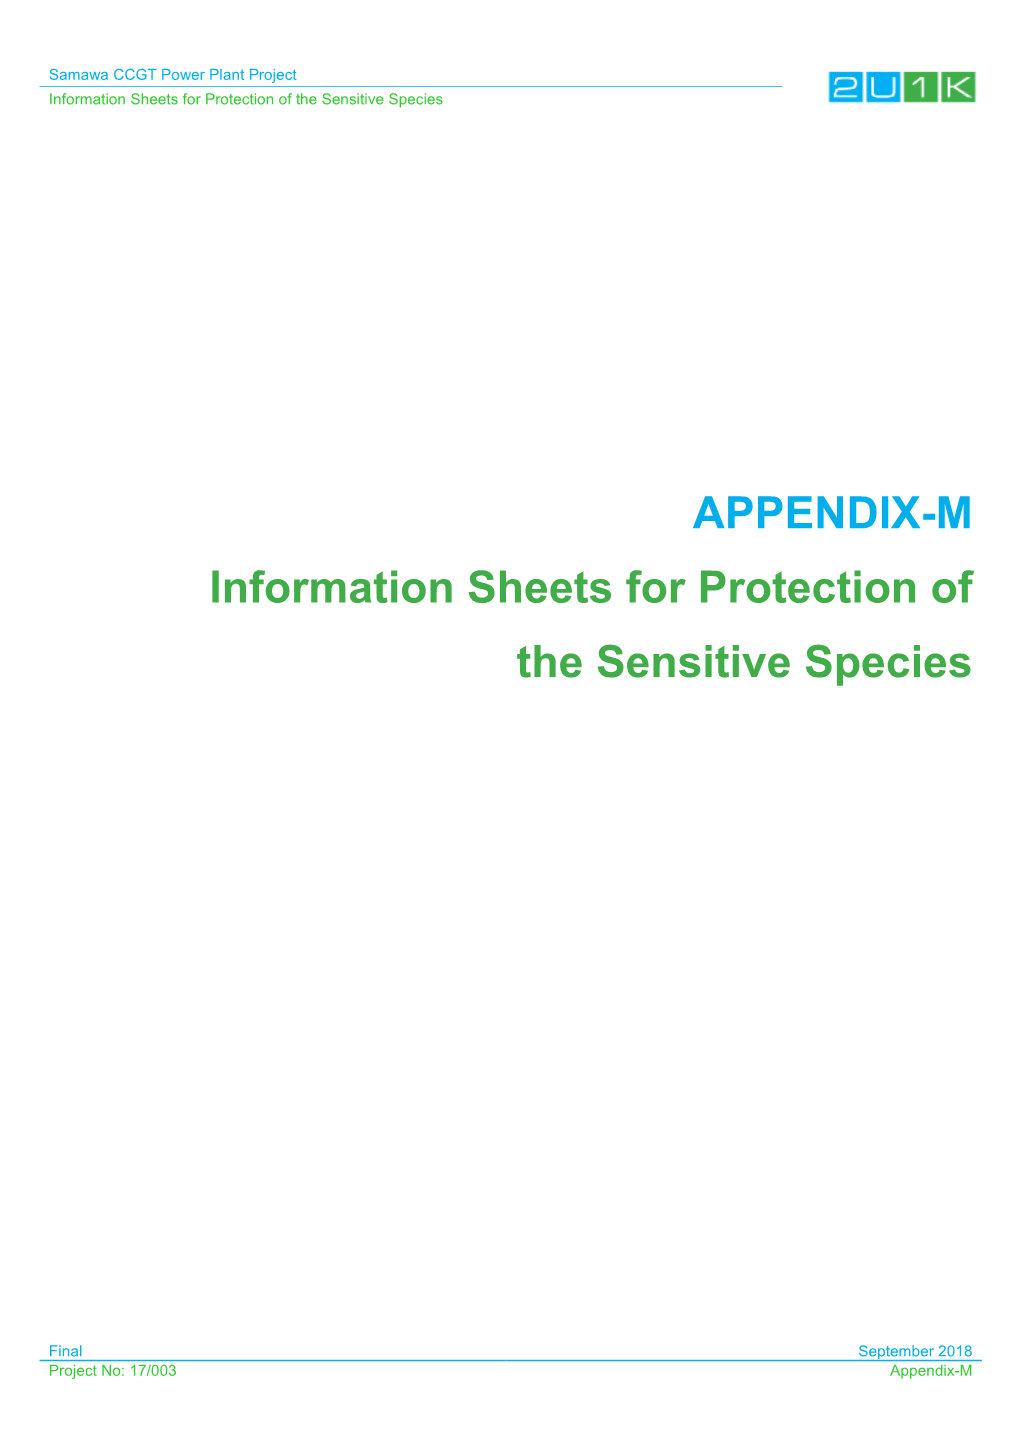 APPENDIX-M Information Sheets for Protection of the Sensitive Species